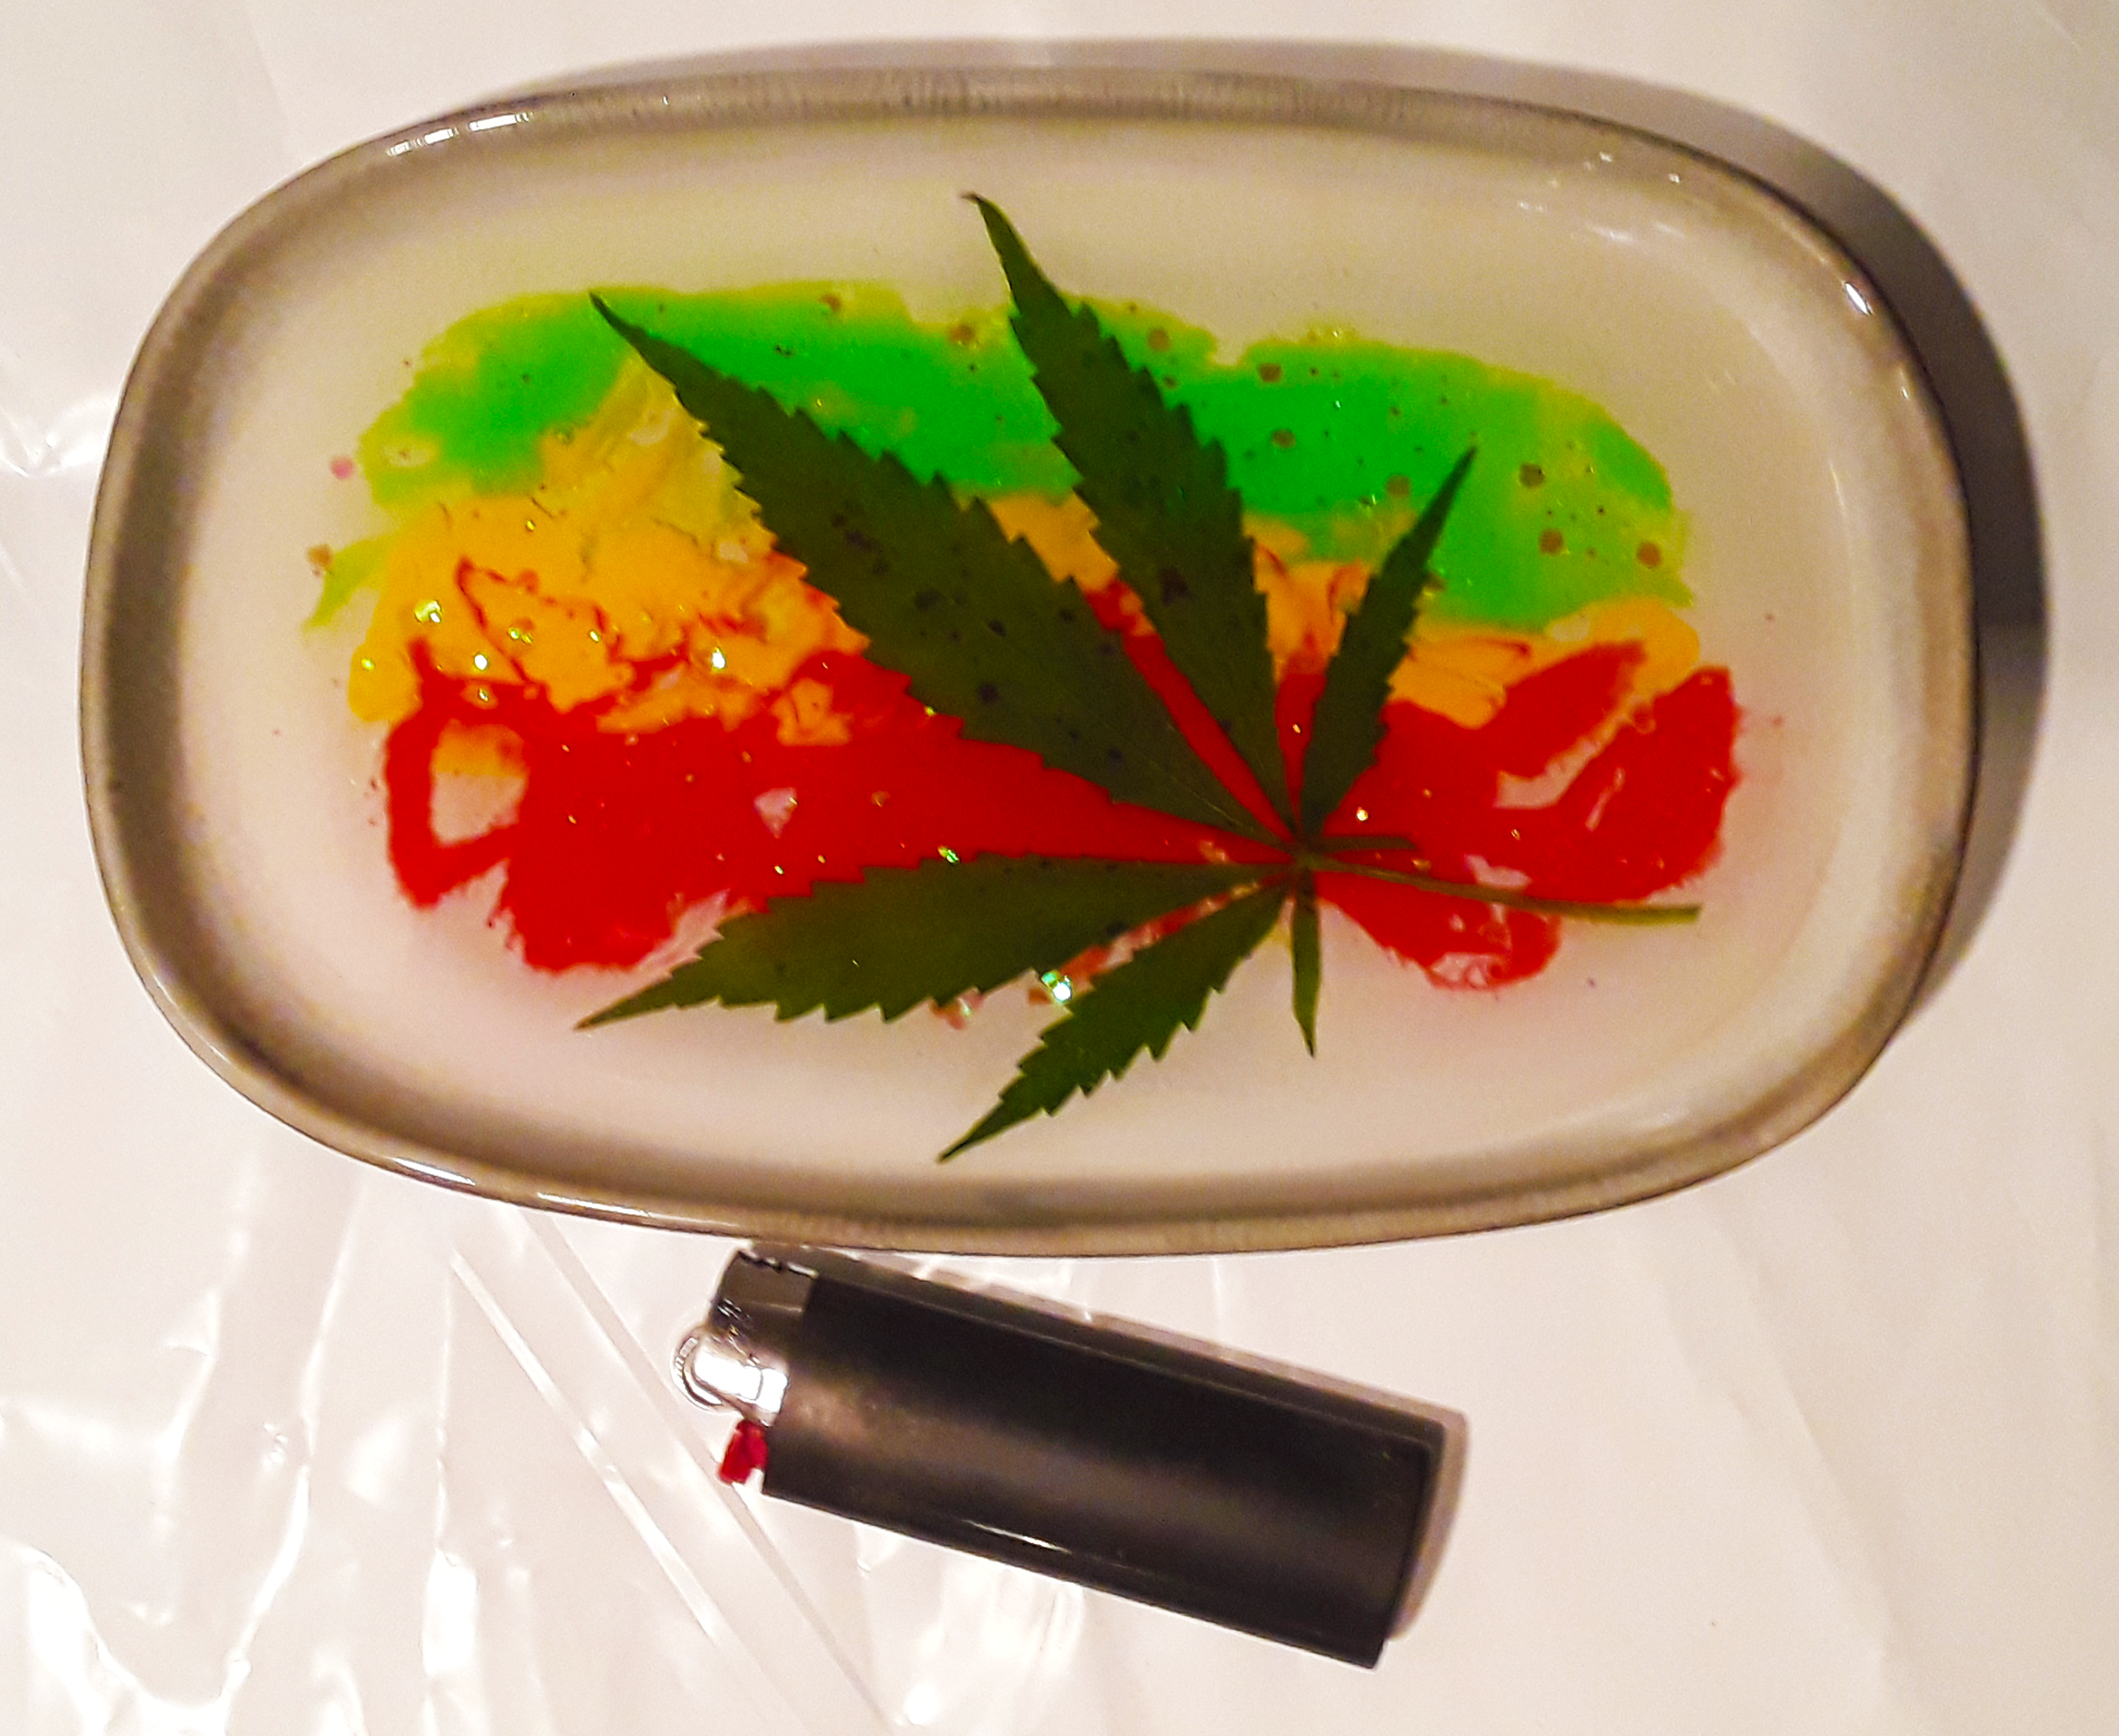 0012 – 3-D Ceramic Rolling Tray With A REAL Cannabis / Marijuana / Weed  Leaf Pressed and Suspended in Epoxy Resin